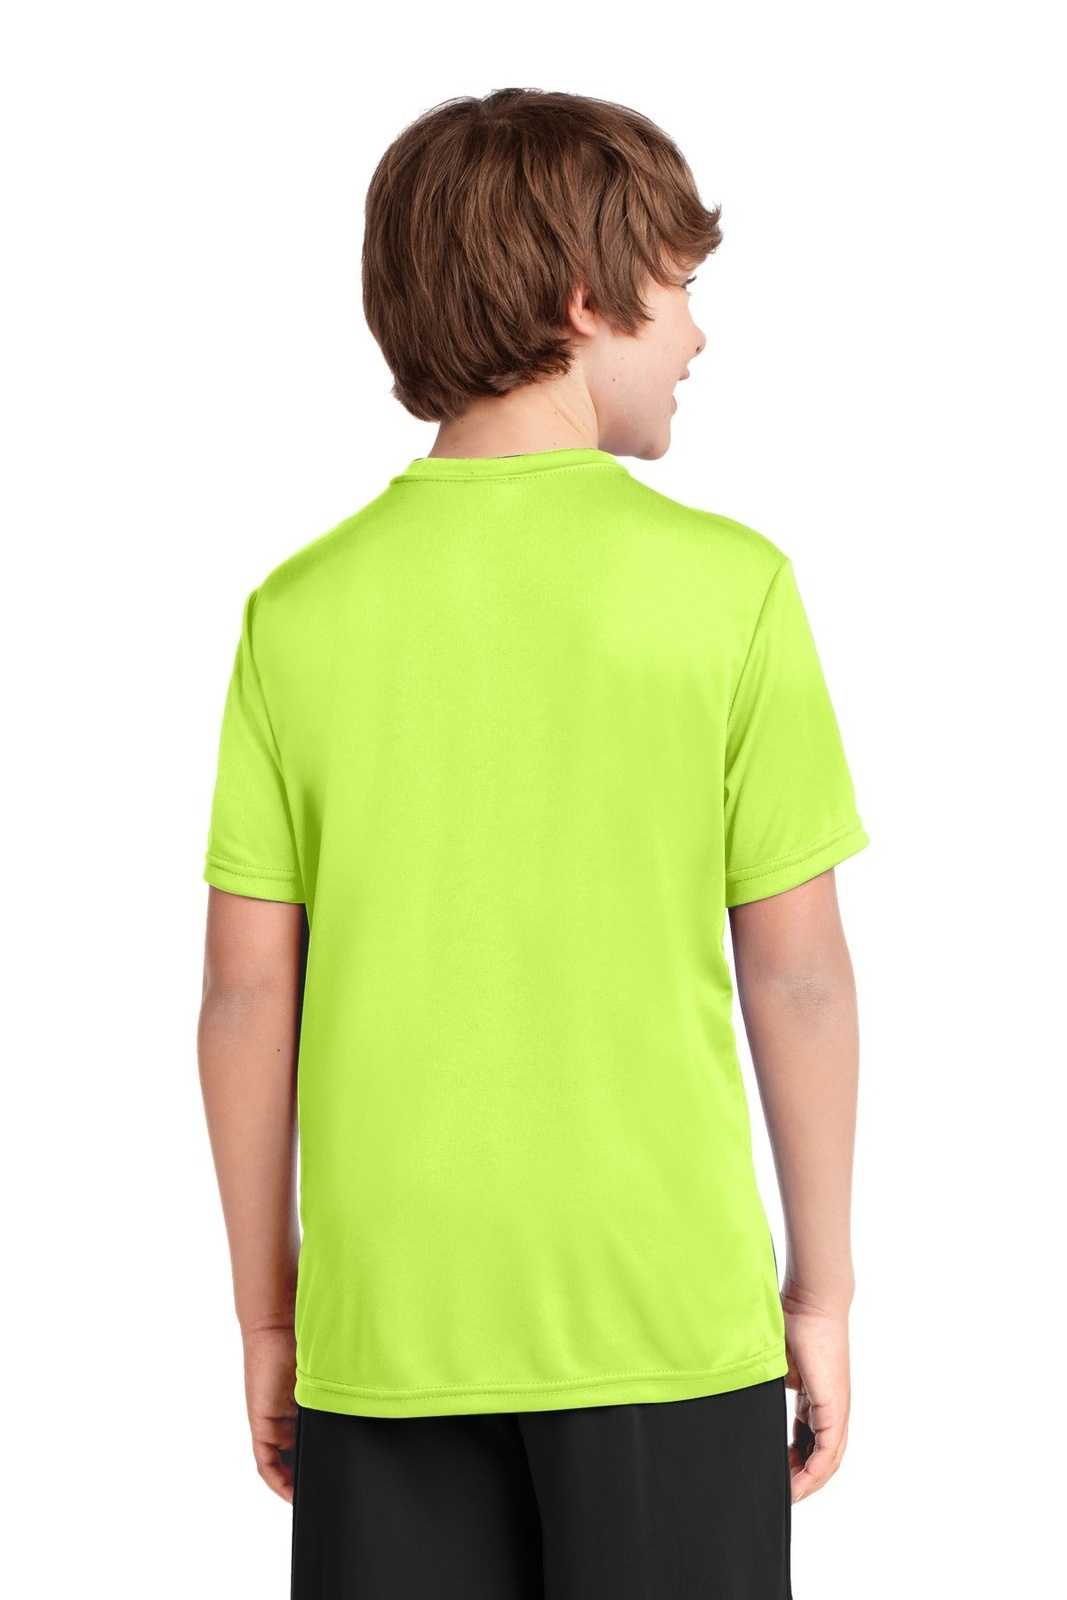 Port & Company PC380Y Youth Performance Tee - Neon Yellow - HIT a Double - 1